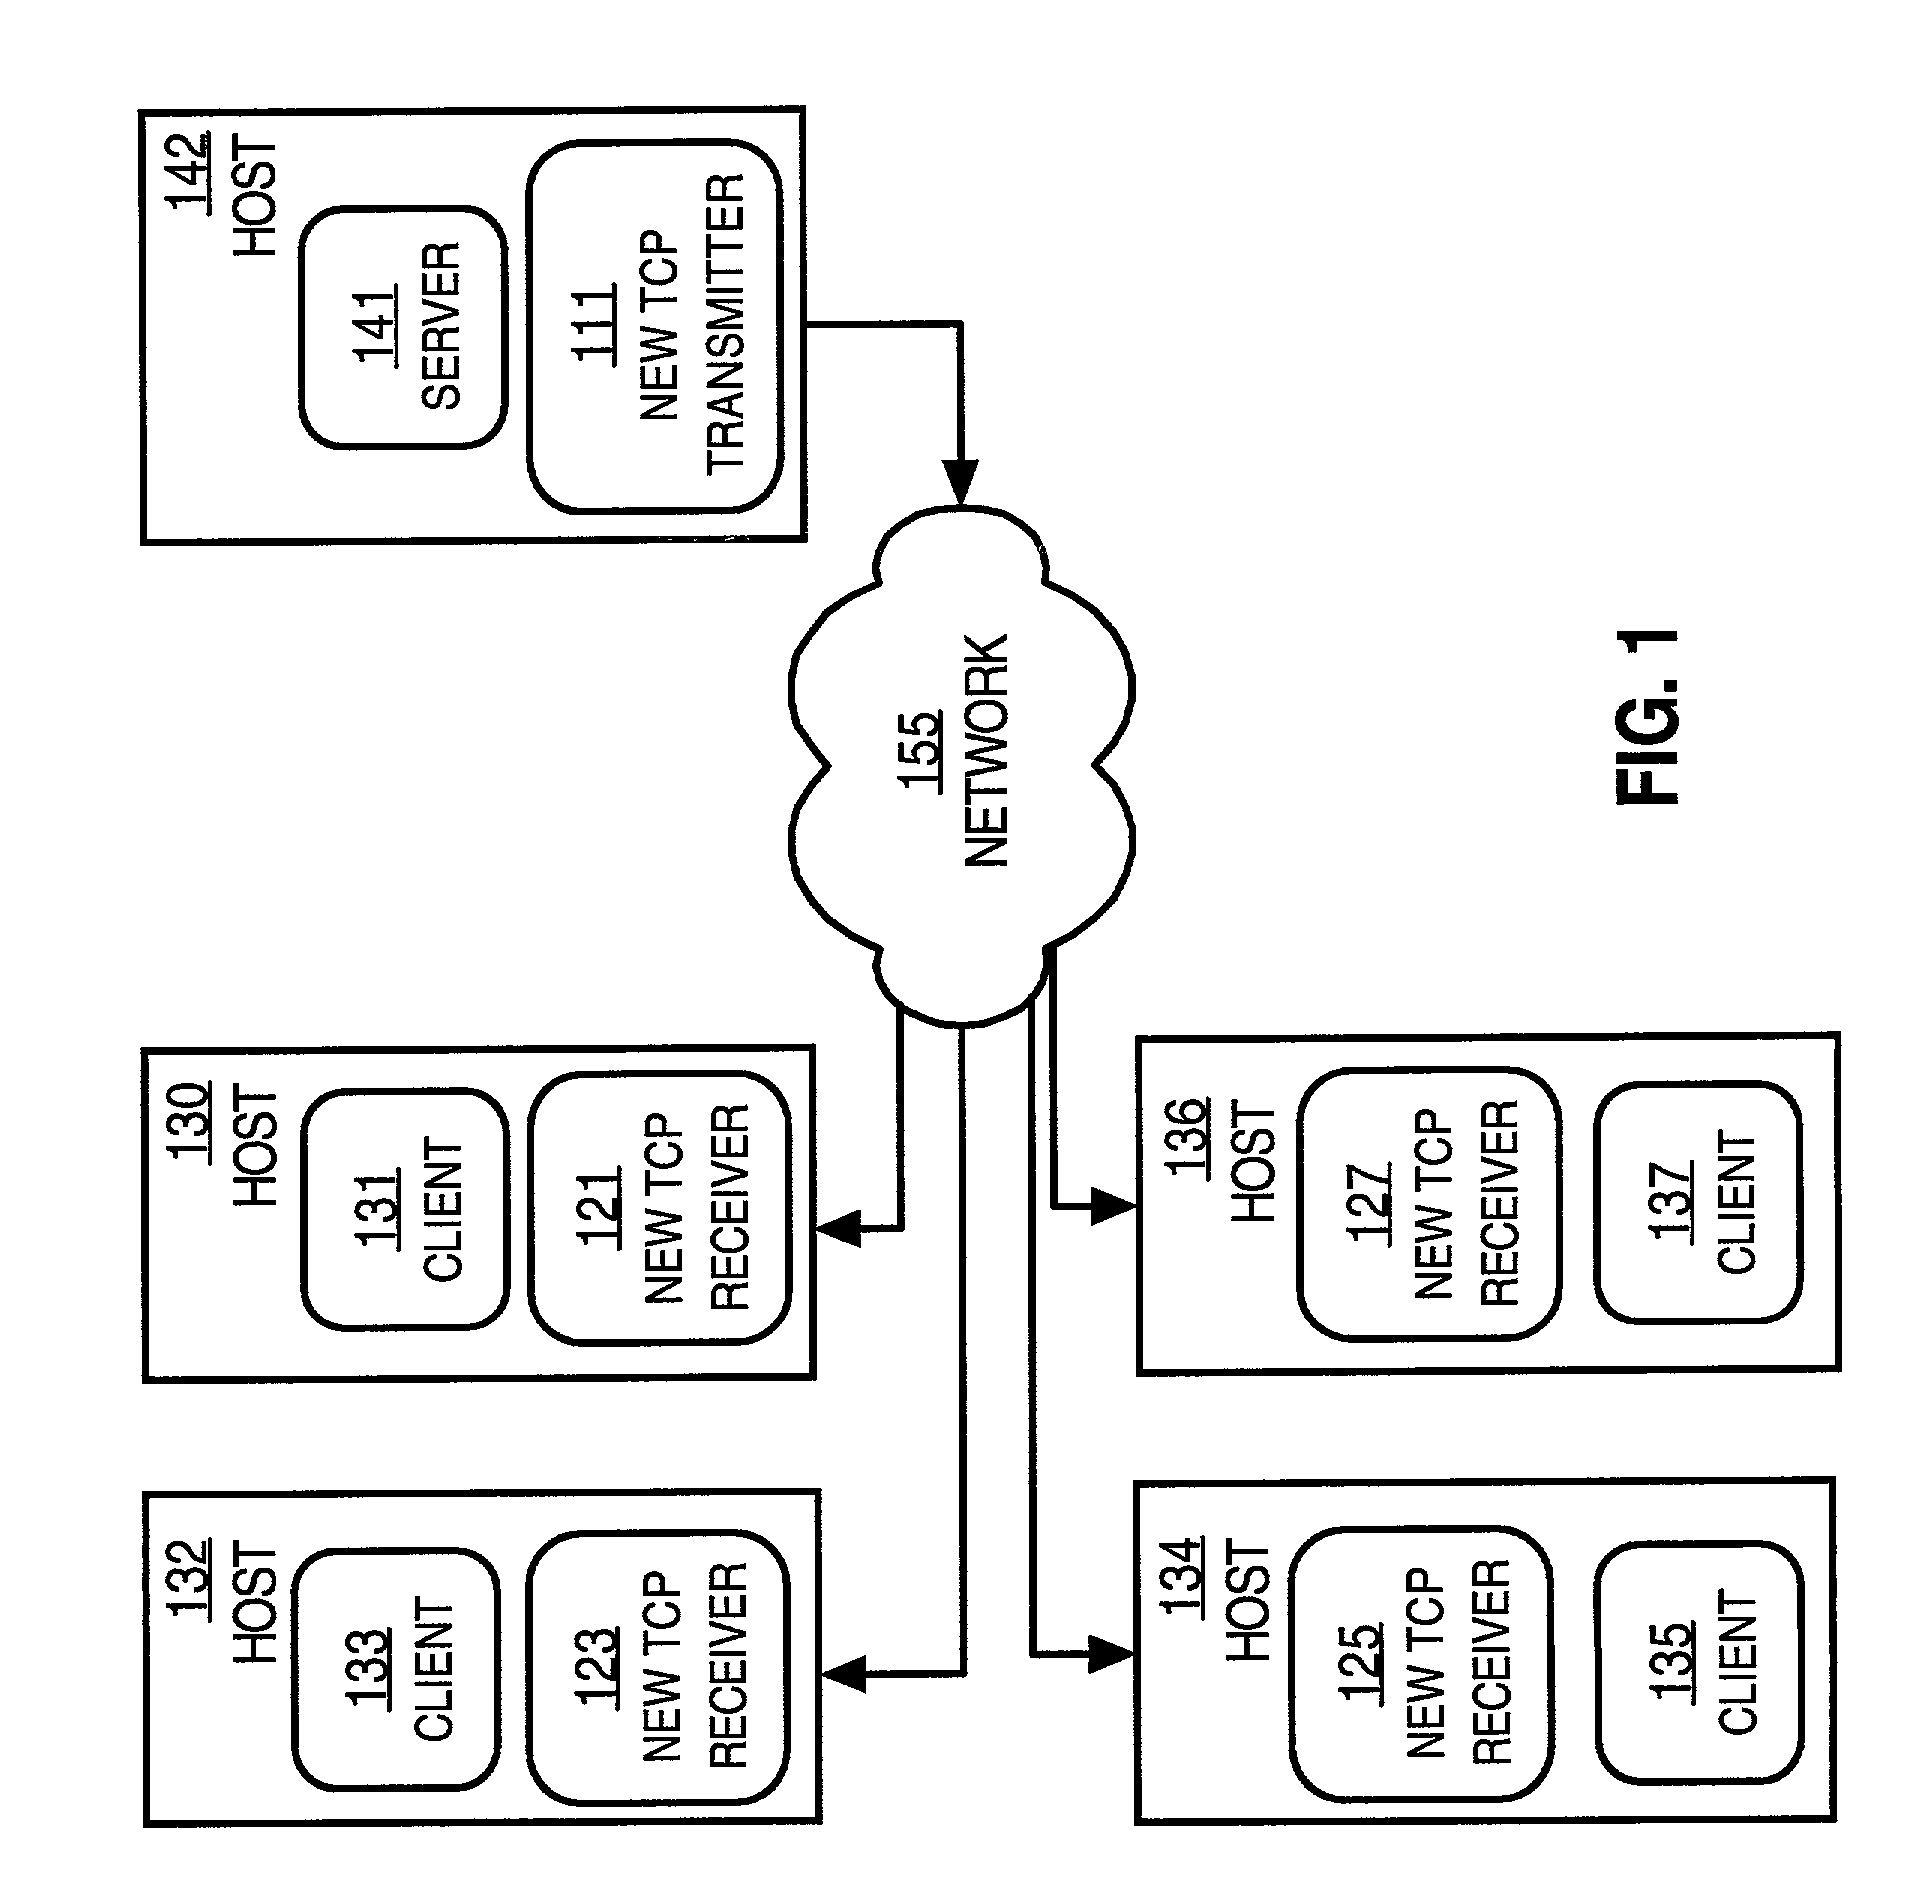 Method and apparatus for client-side flow control in a transport protocol